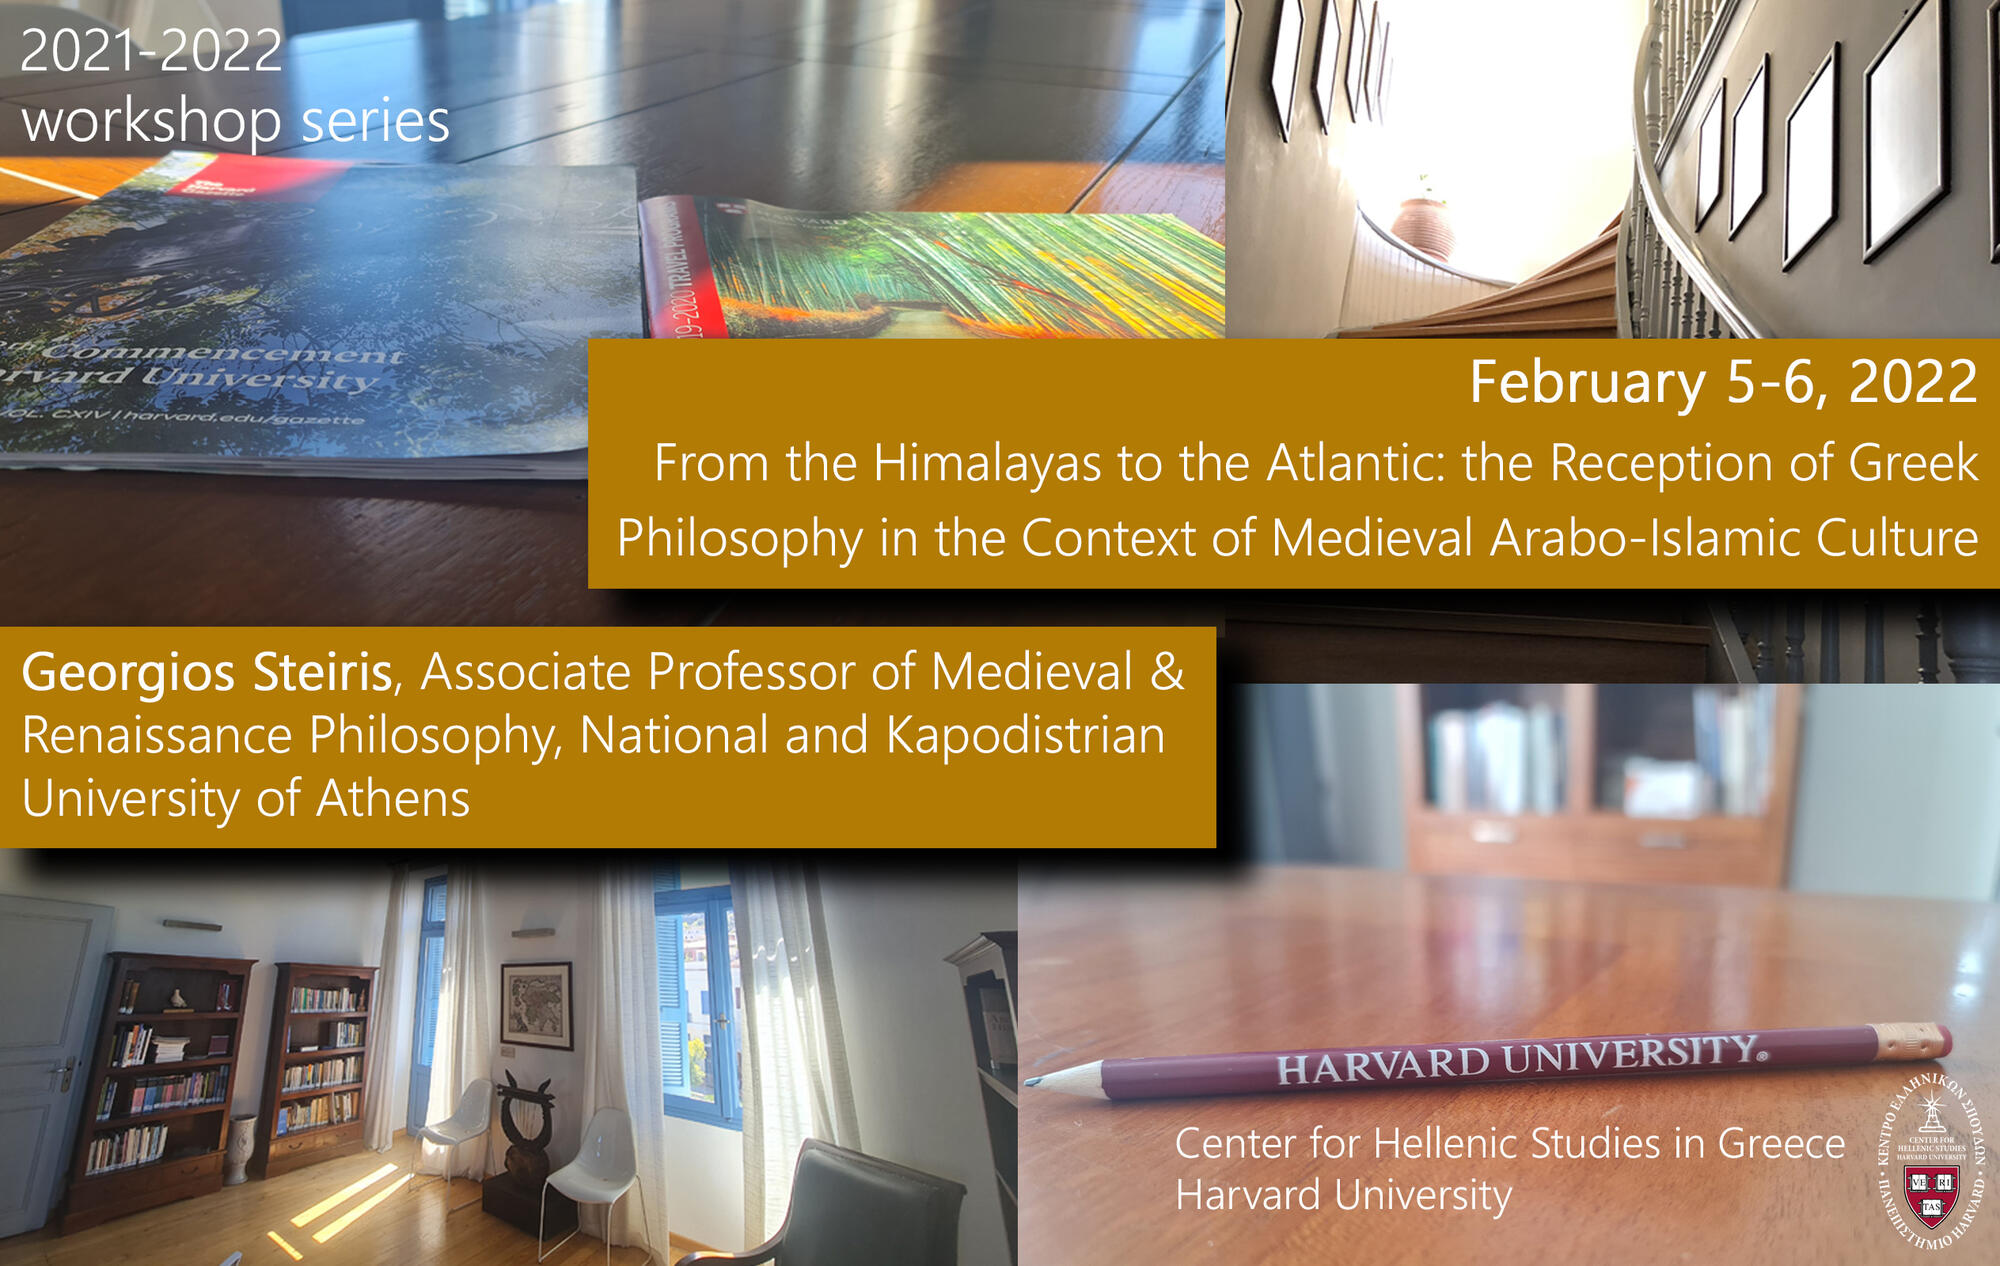 Photo collage depicting Harvard leaflets, a staircase, the CHS Greece Fellows' Room, and a pencil on a desk.